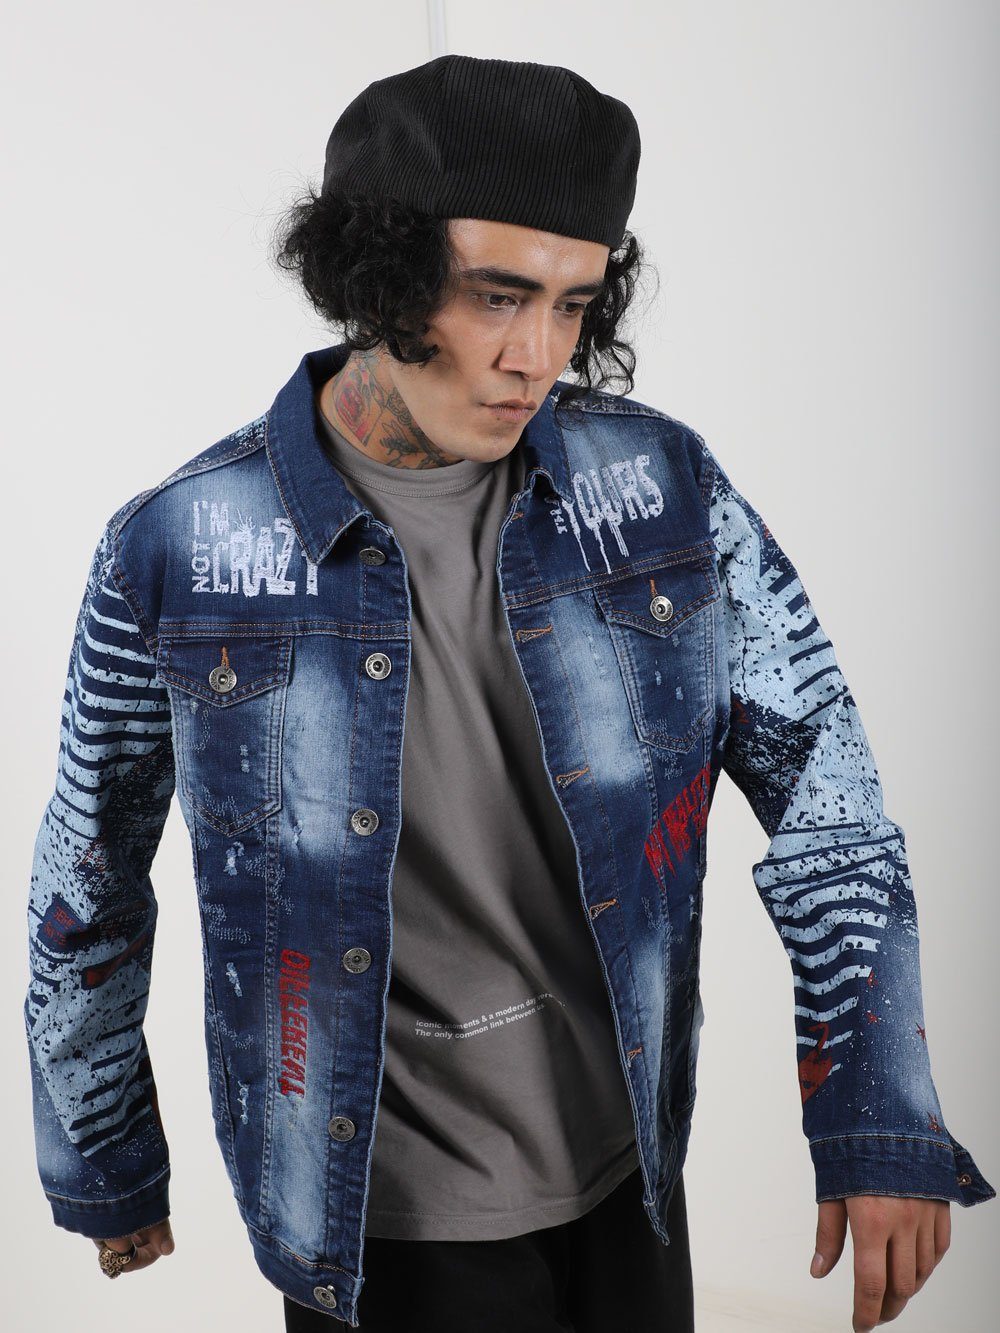 A man wearing a CRAZY CAT denim jacket with graffiti on it.